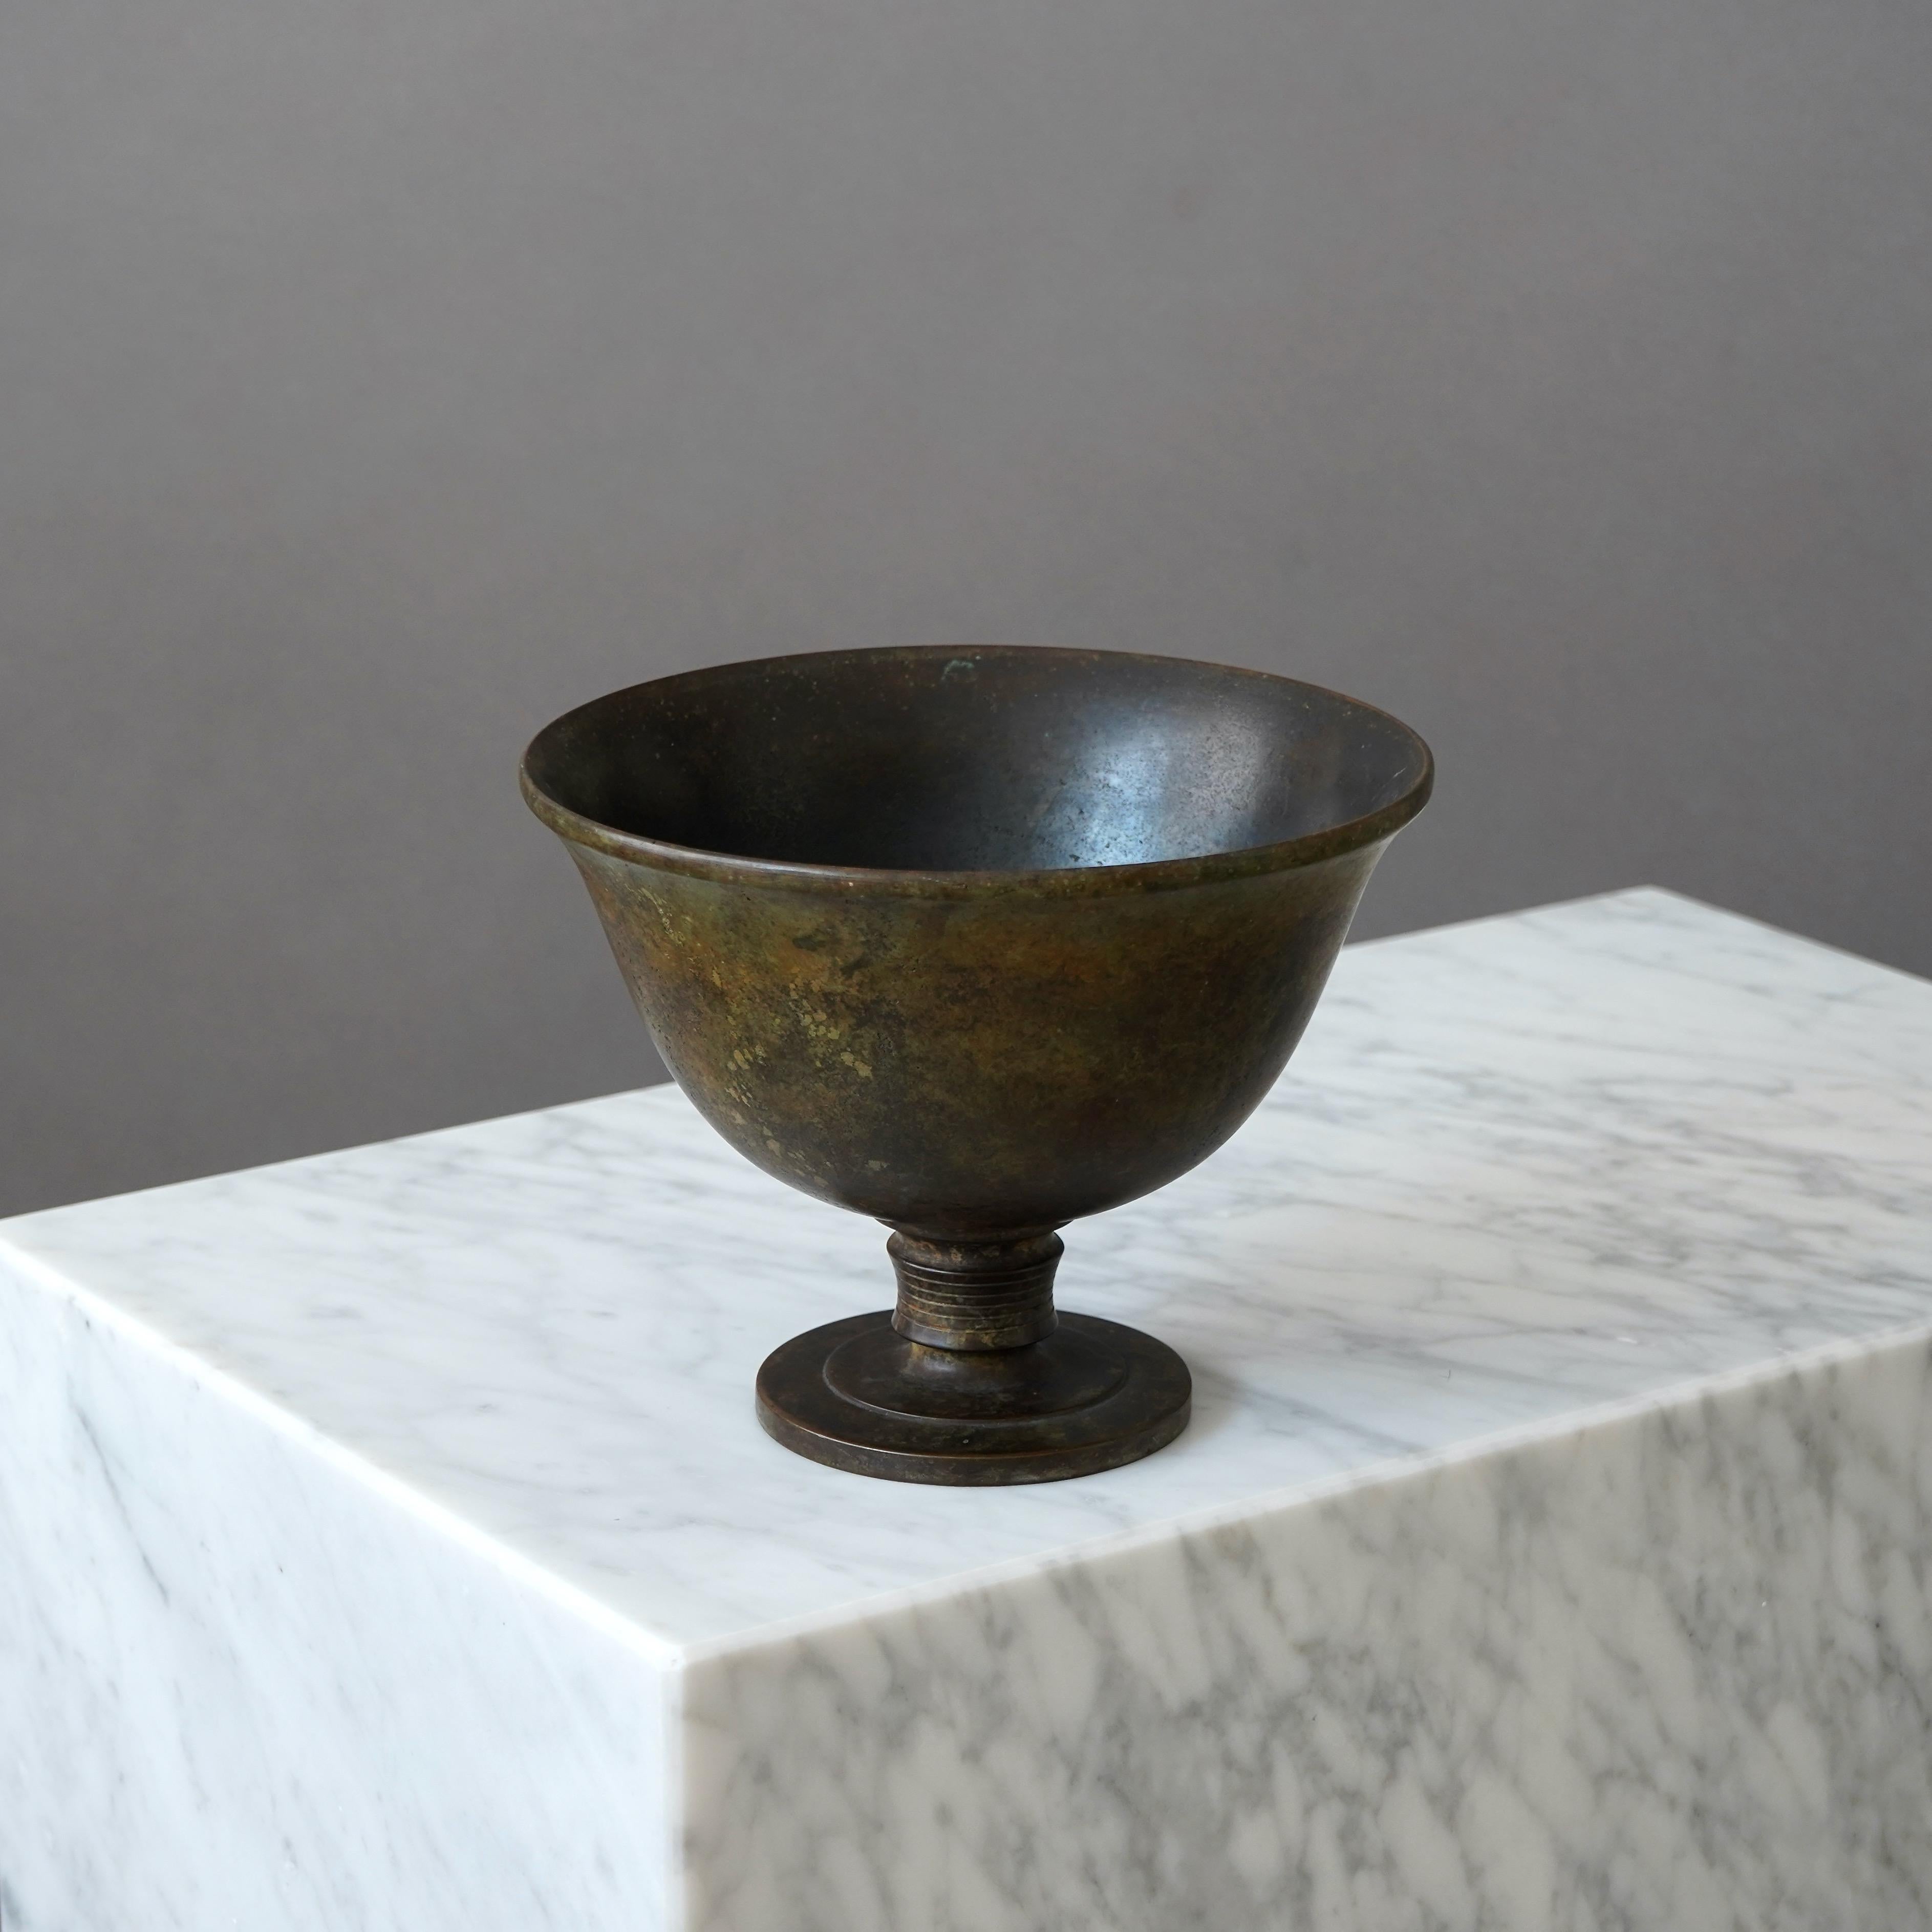 A beautiful footed bowl in bronze with amazing patina. Made by GAB Guldsmedsaktiebolaget, Sweden, 1930s.  

Great condition.
Stamped 'BRONS' and makers mark.